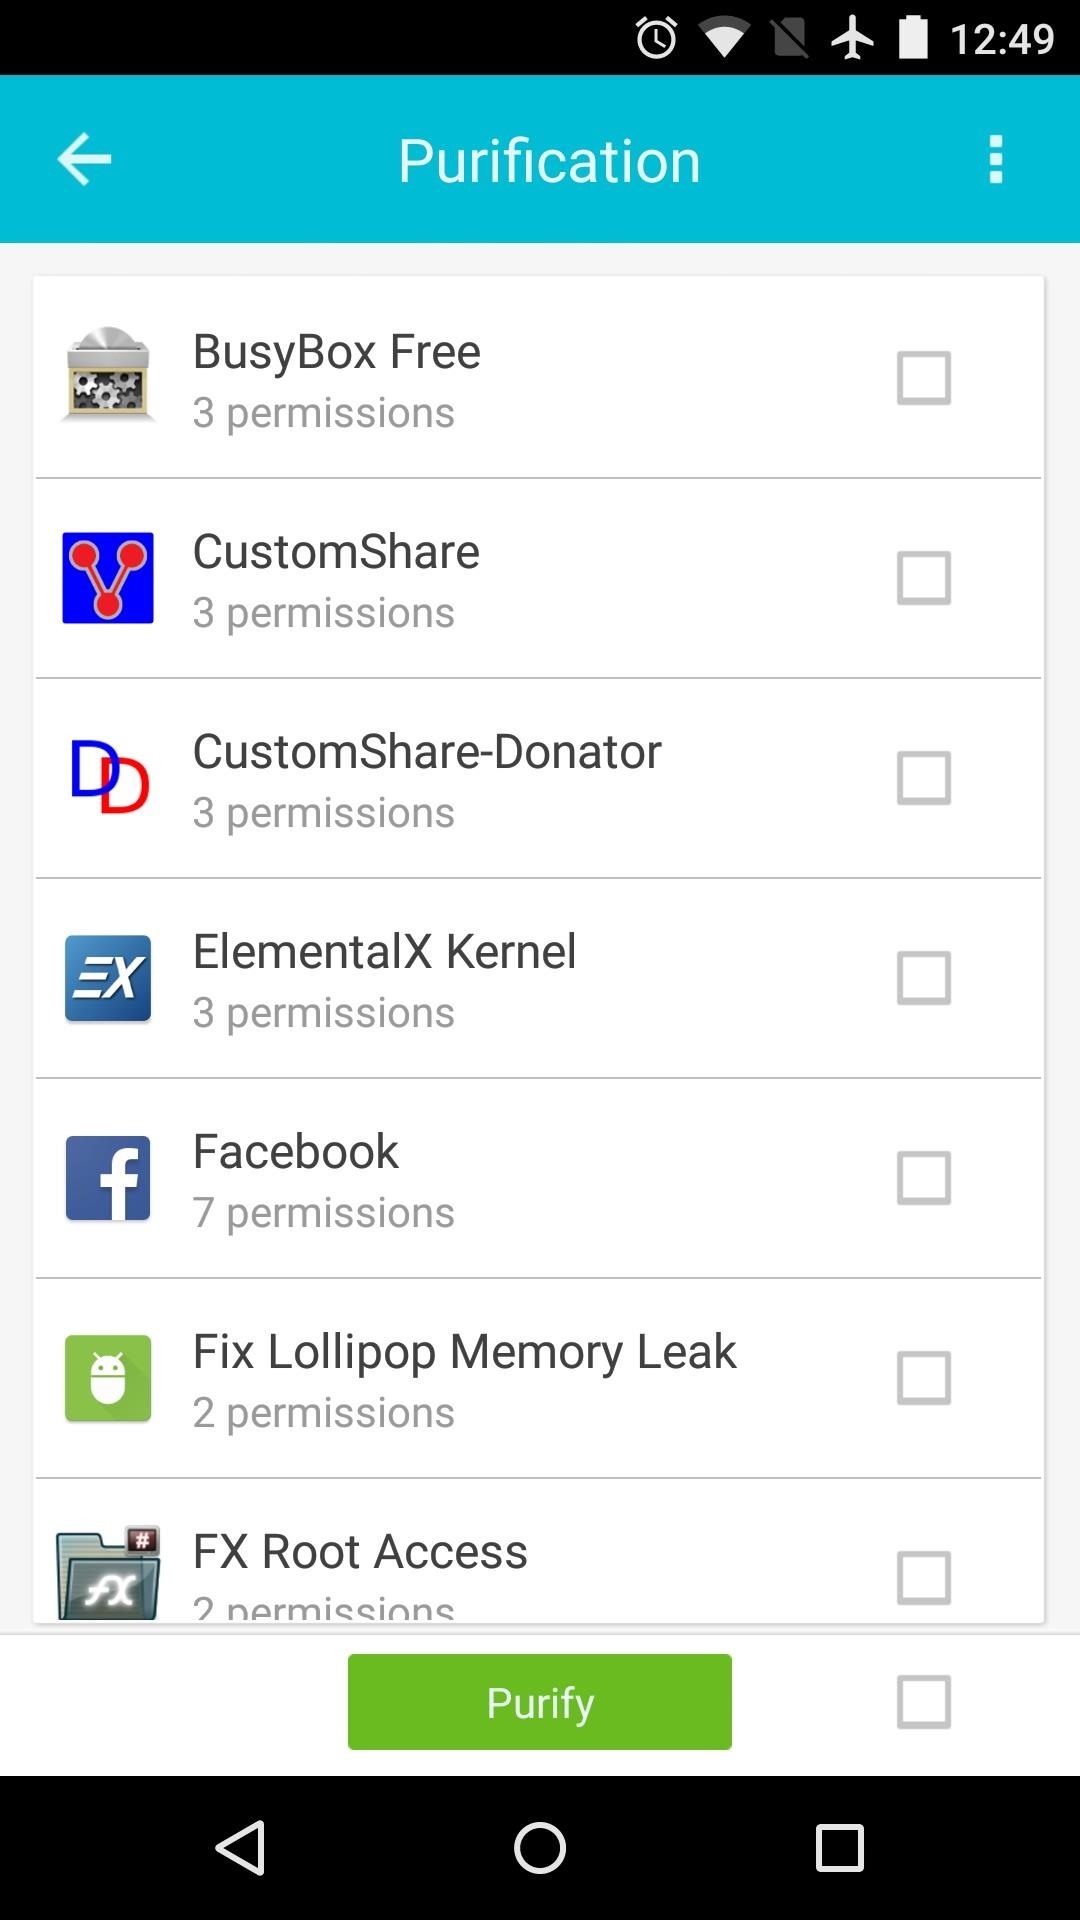 Manage App Permissions: Regularly review and manage the permissions granted to your installed apps to ensure they align with your privacy preferences.
Revoke Unnecessary Permissions: Identify apps that have unnecessary permissions and revoke them to limit their access to your personal information.